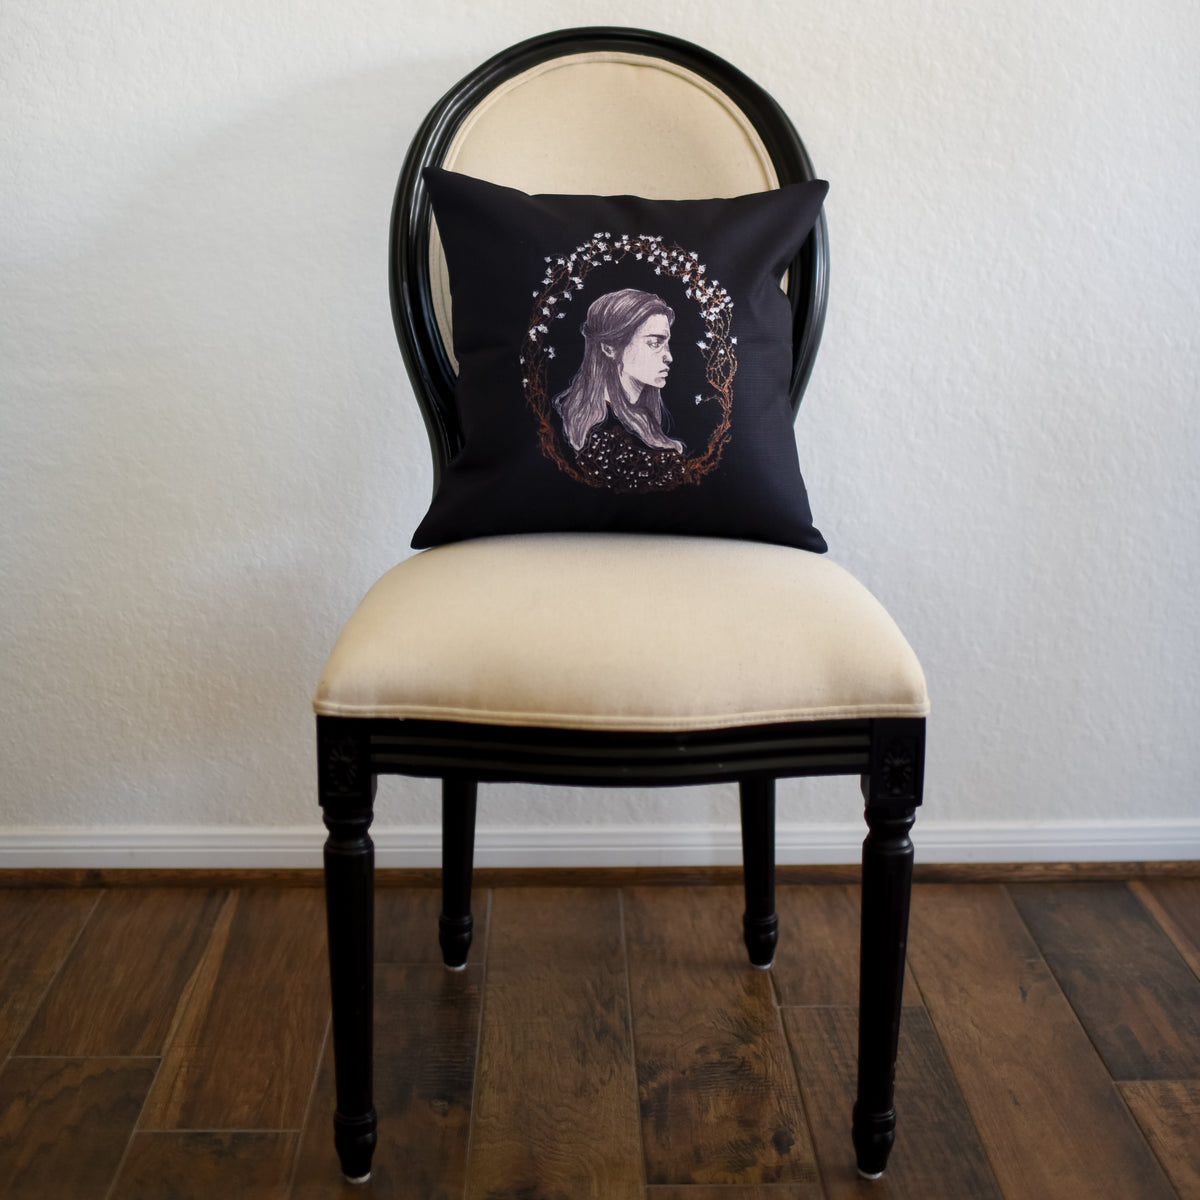 Wuthering Heights Pillow Cover has a cameo of Catherine in black and white with a wreath of branches and flowers around her head